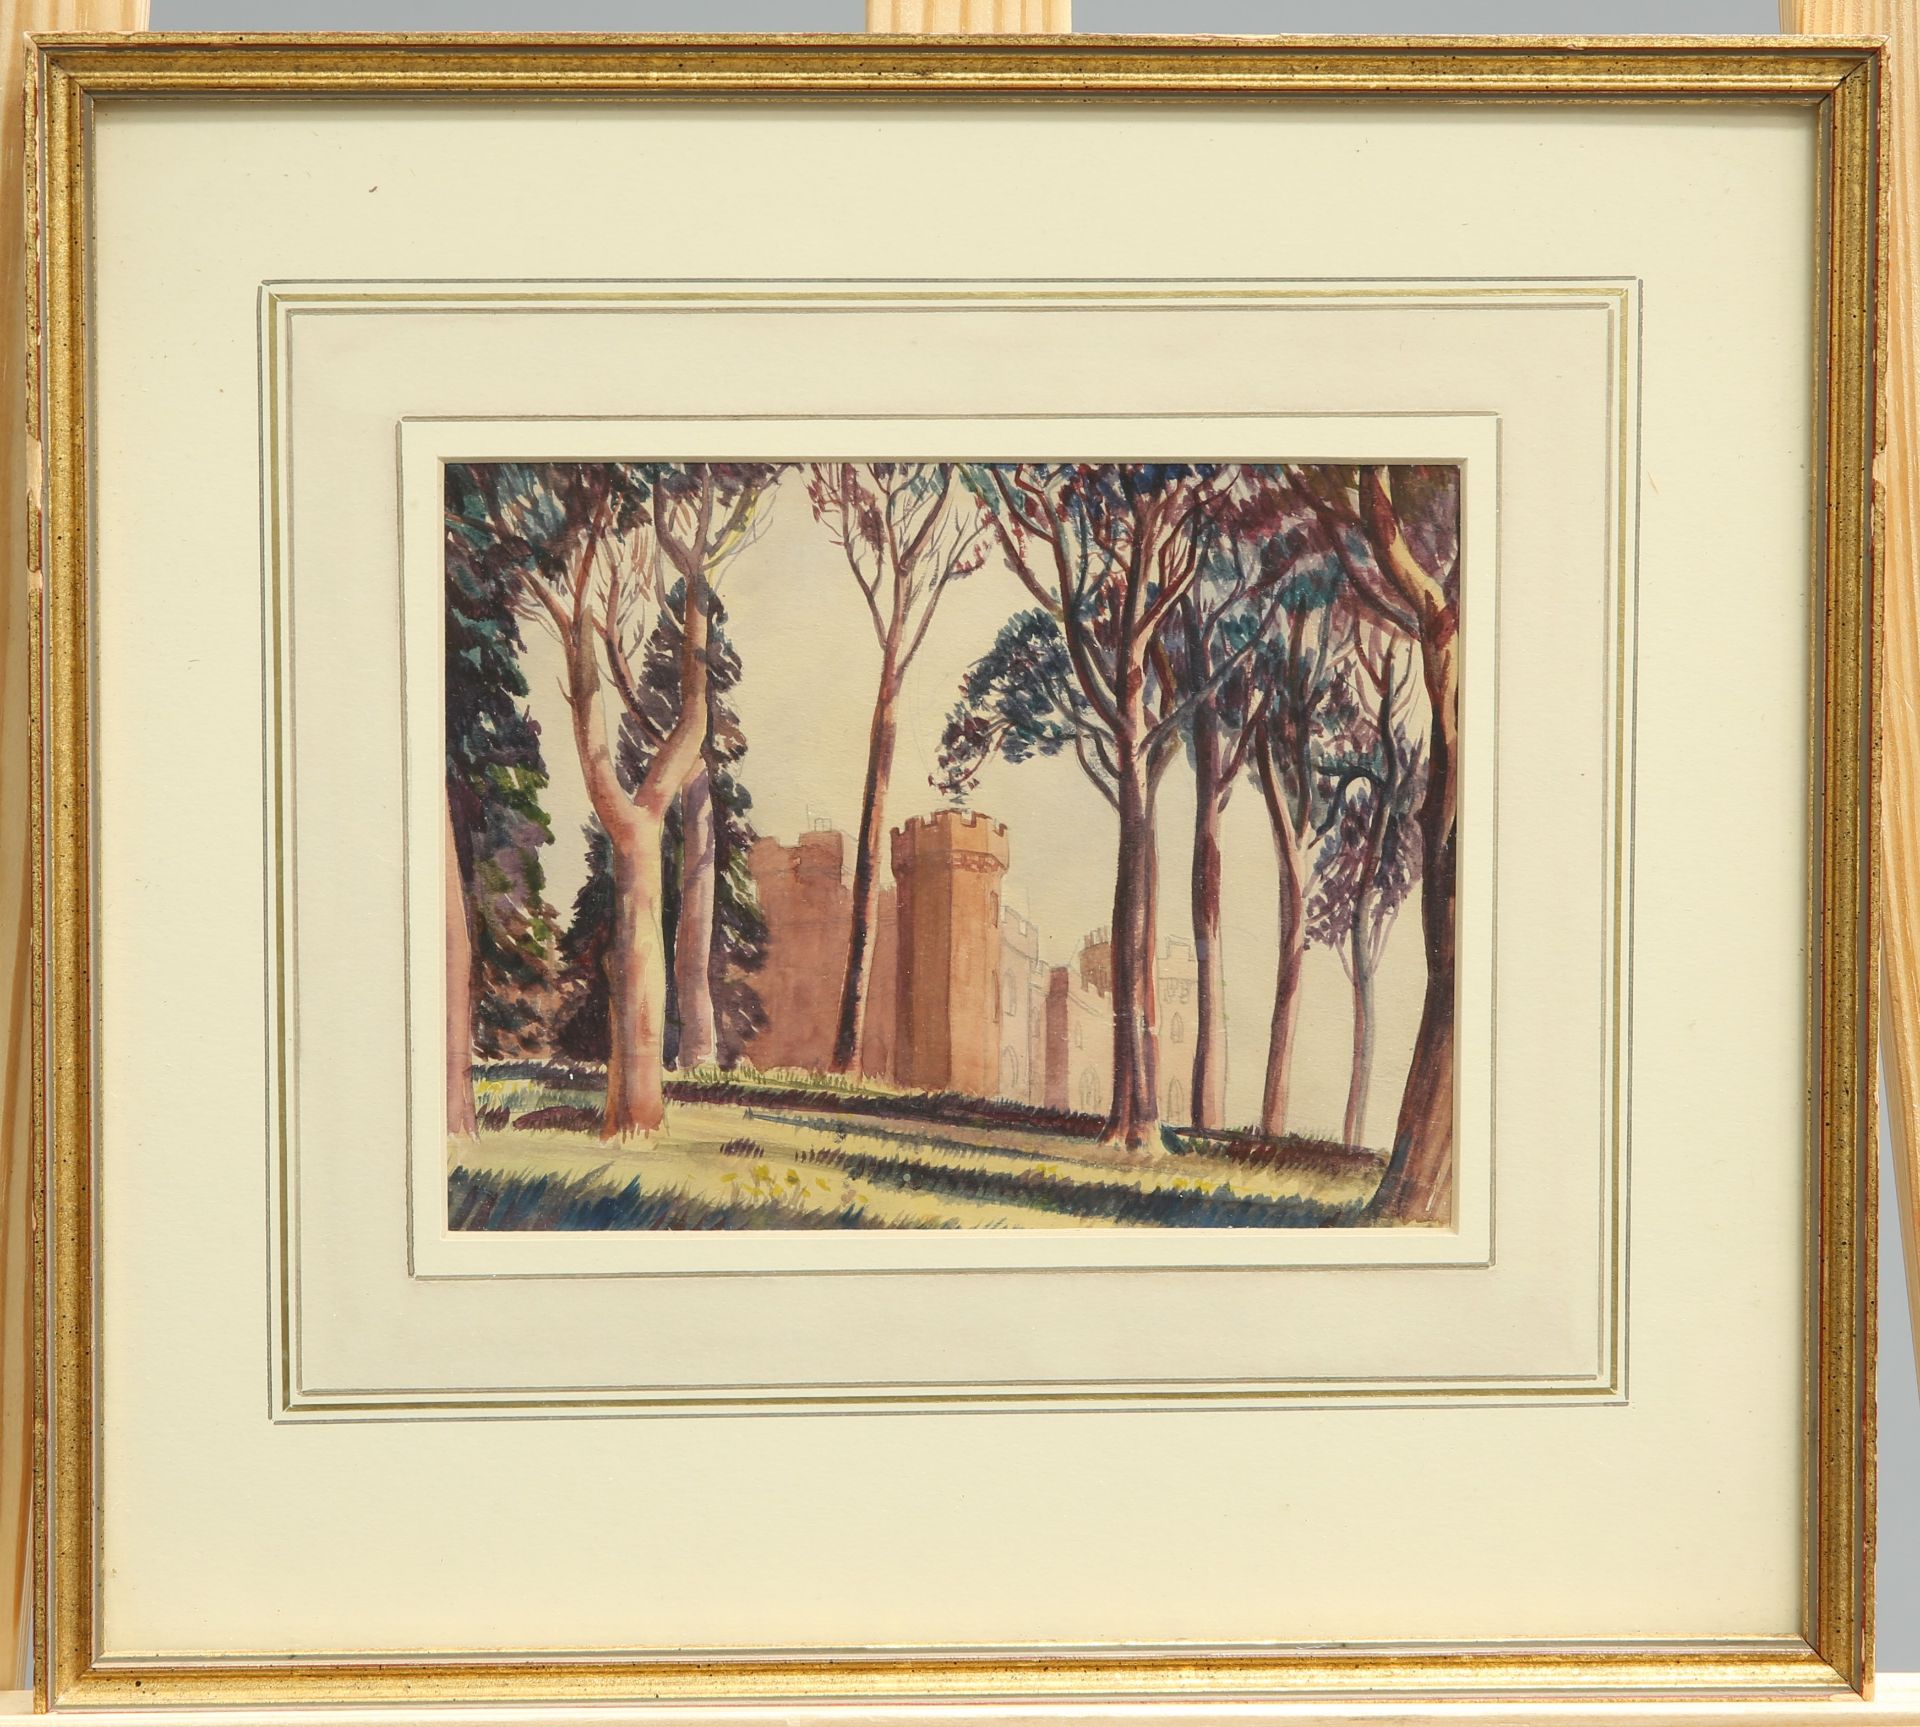 ALFRED BURGESS SHARROCKS, CASTLES, A PAIR, unsigned but labelled verso, watercolours, framed. (2) - Image 2 of 2